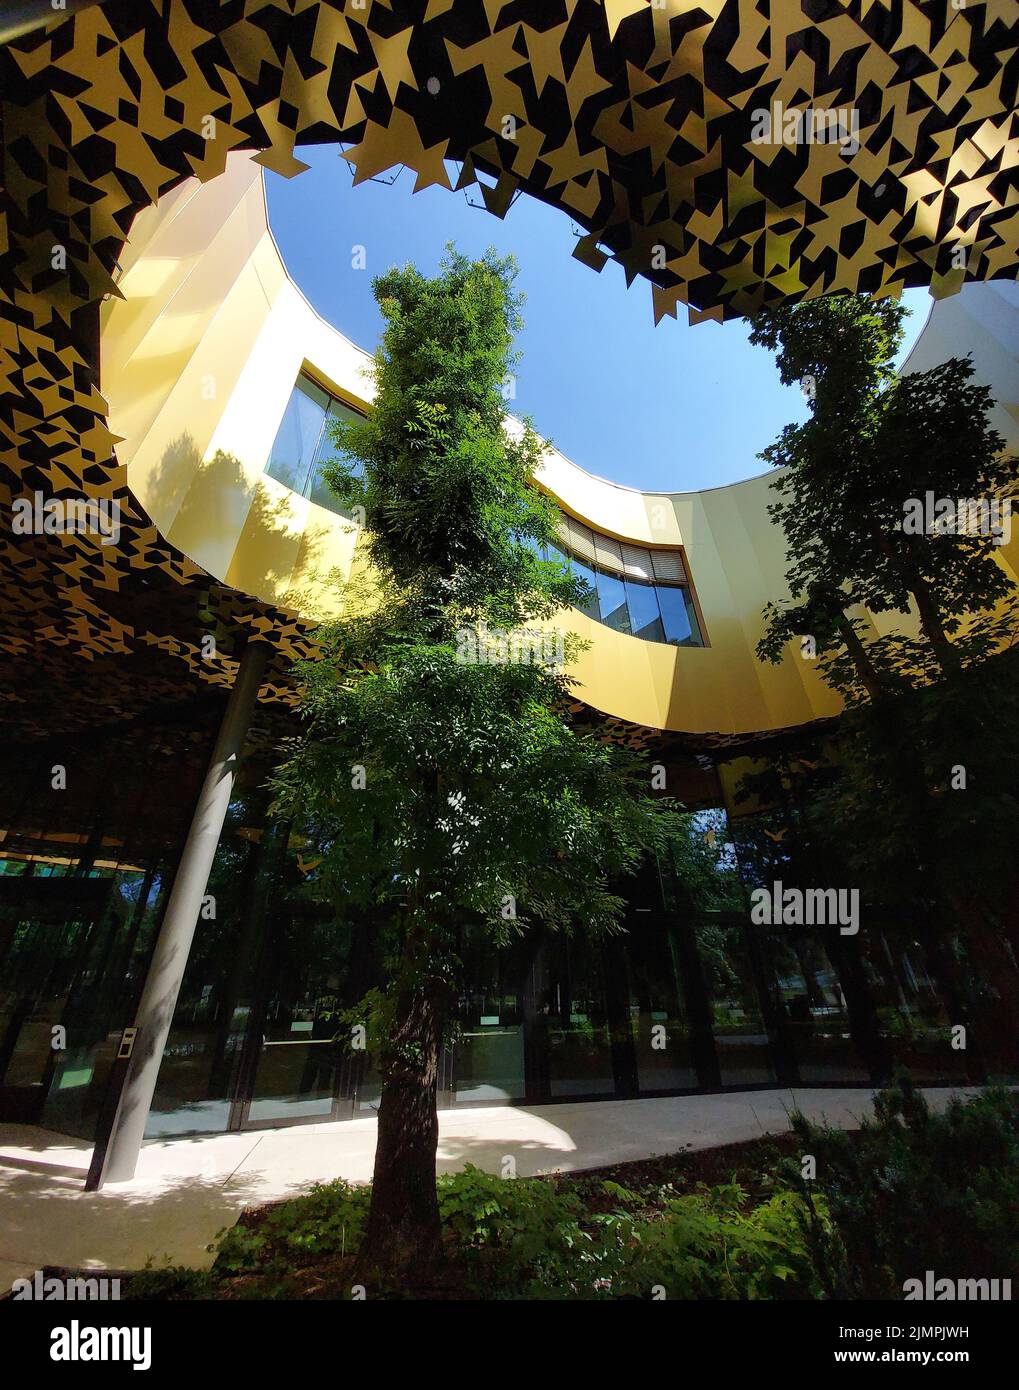 Budapest, Hungary - House of Hungarian music. Detail leafy tree in architecture. Stock Photo